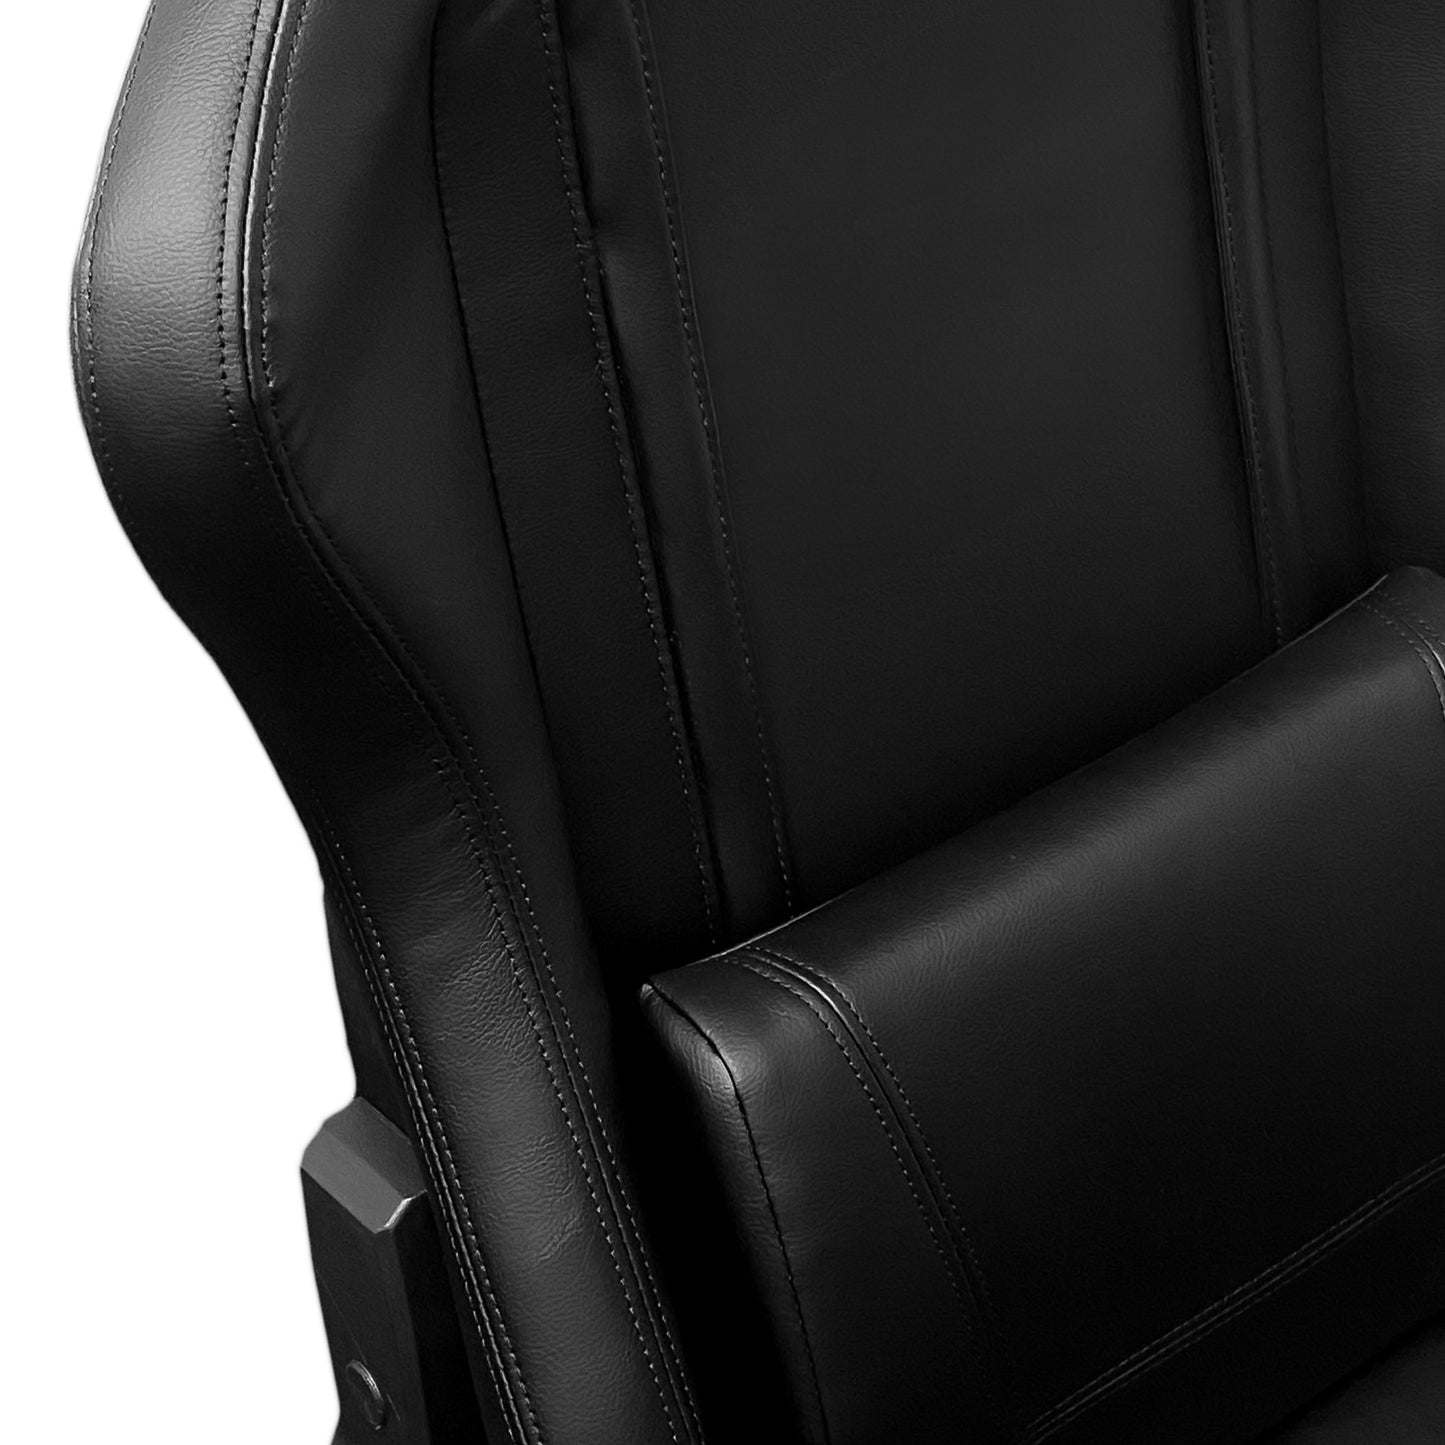 Xpression Pro Gaming Chair with  Buffalo Bills Secondary Logo